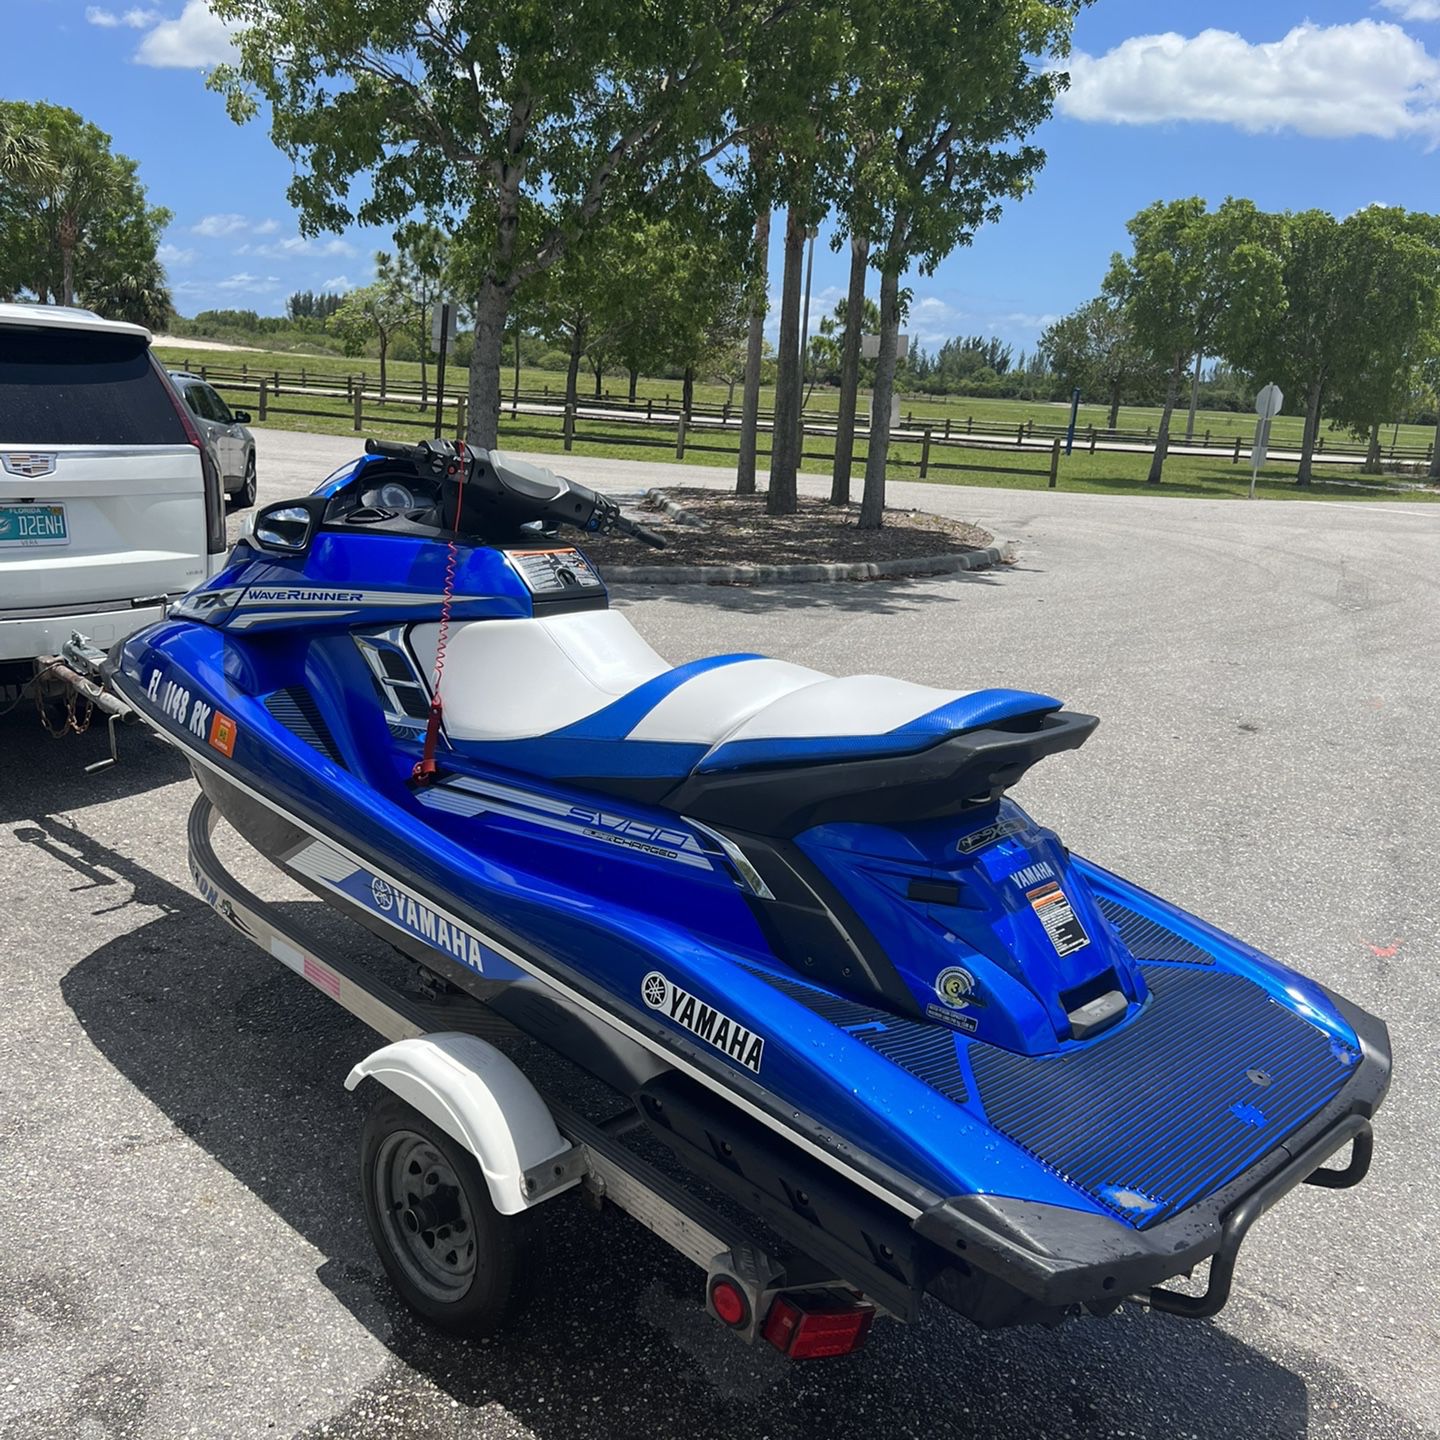 2017 FX SVHO Garage kept well-maintained with no problems with 300 hours and just went through maintenance comes with single trailer and title With a 